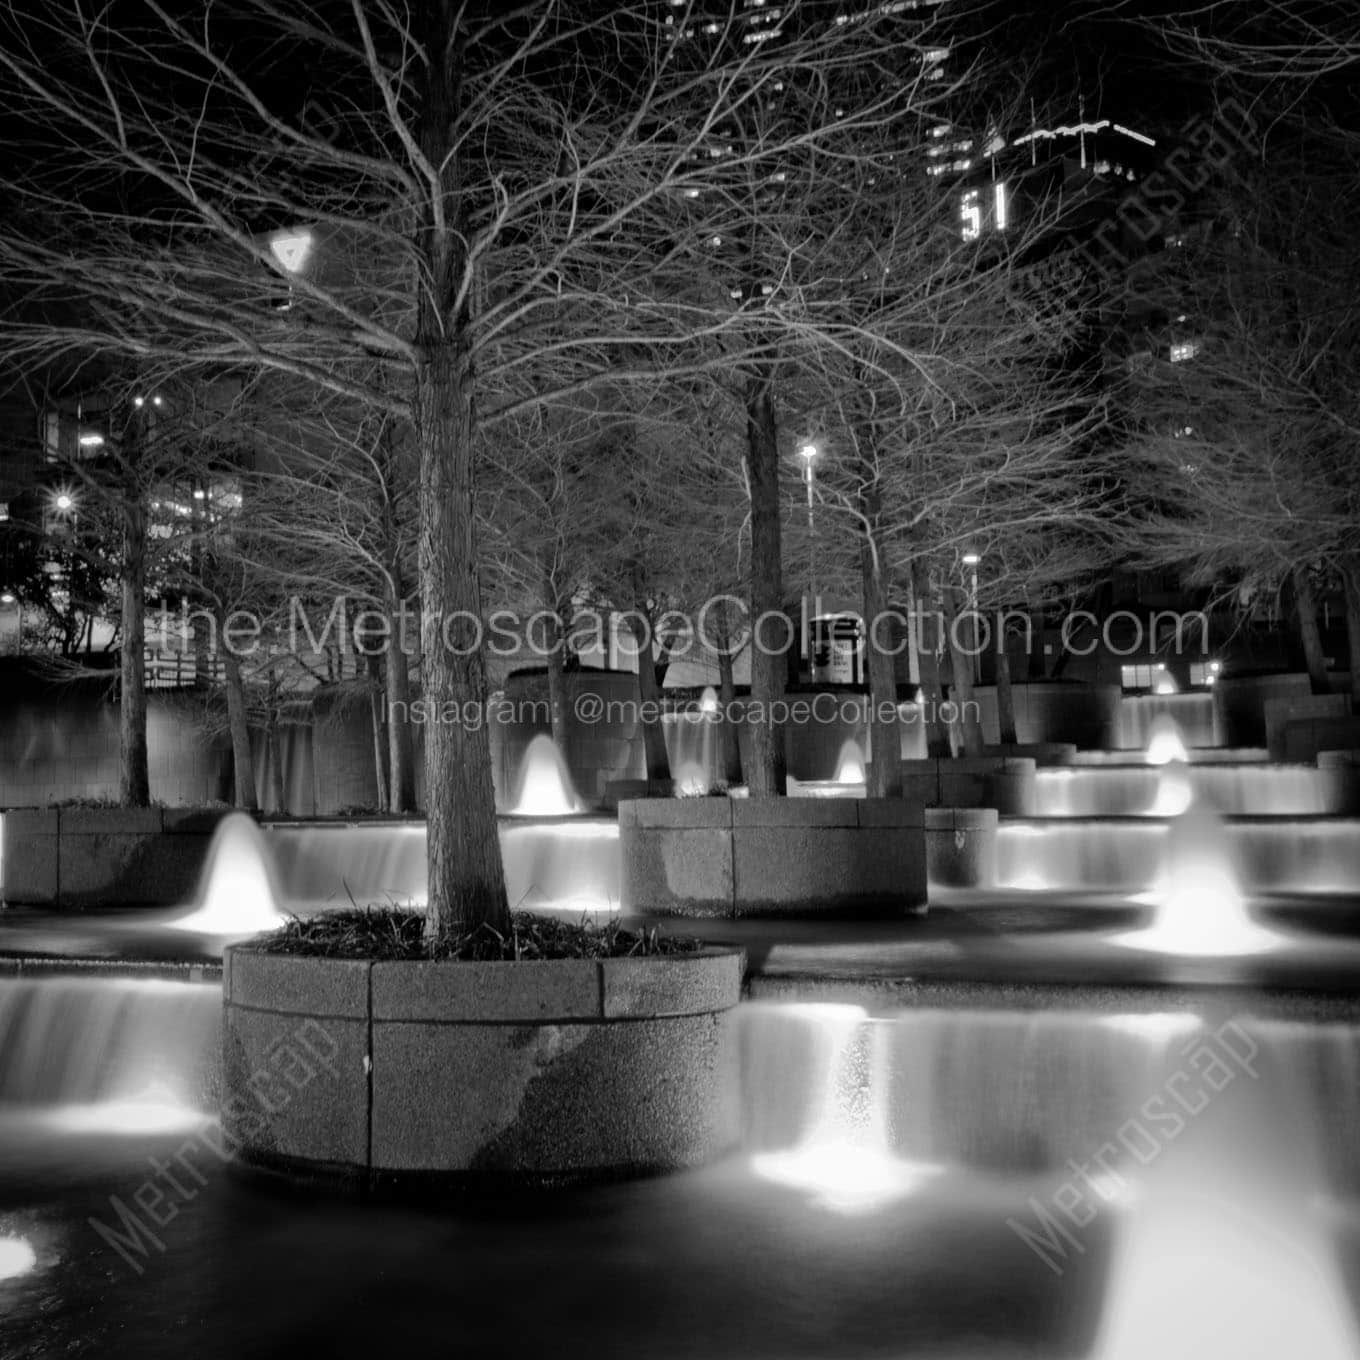 fountain place fountains Black & White Office Art